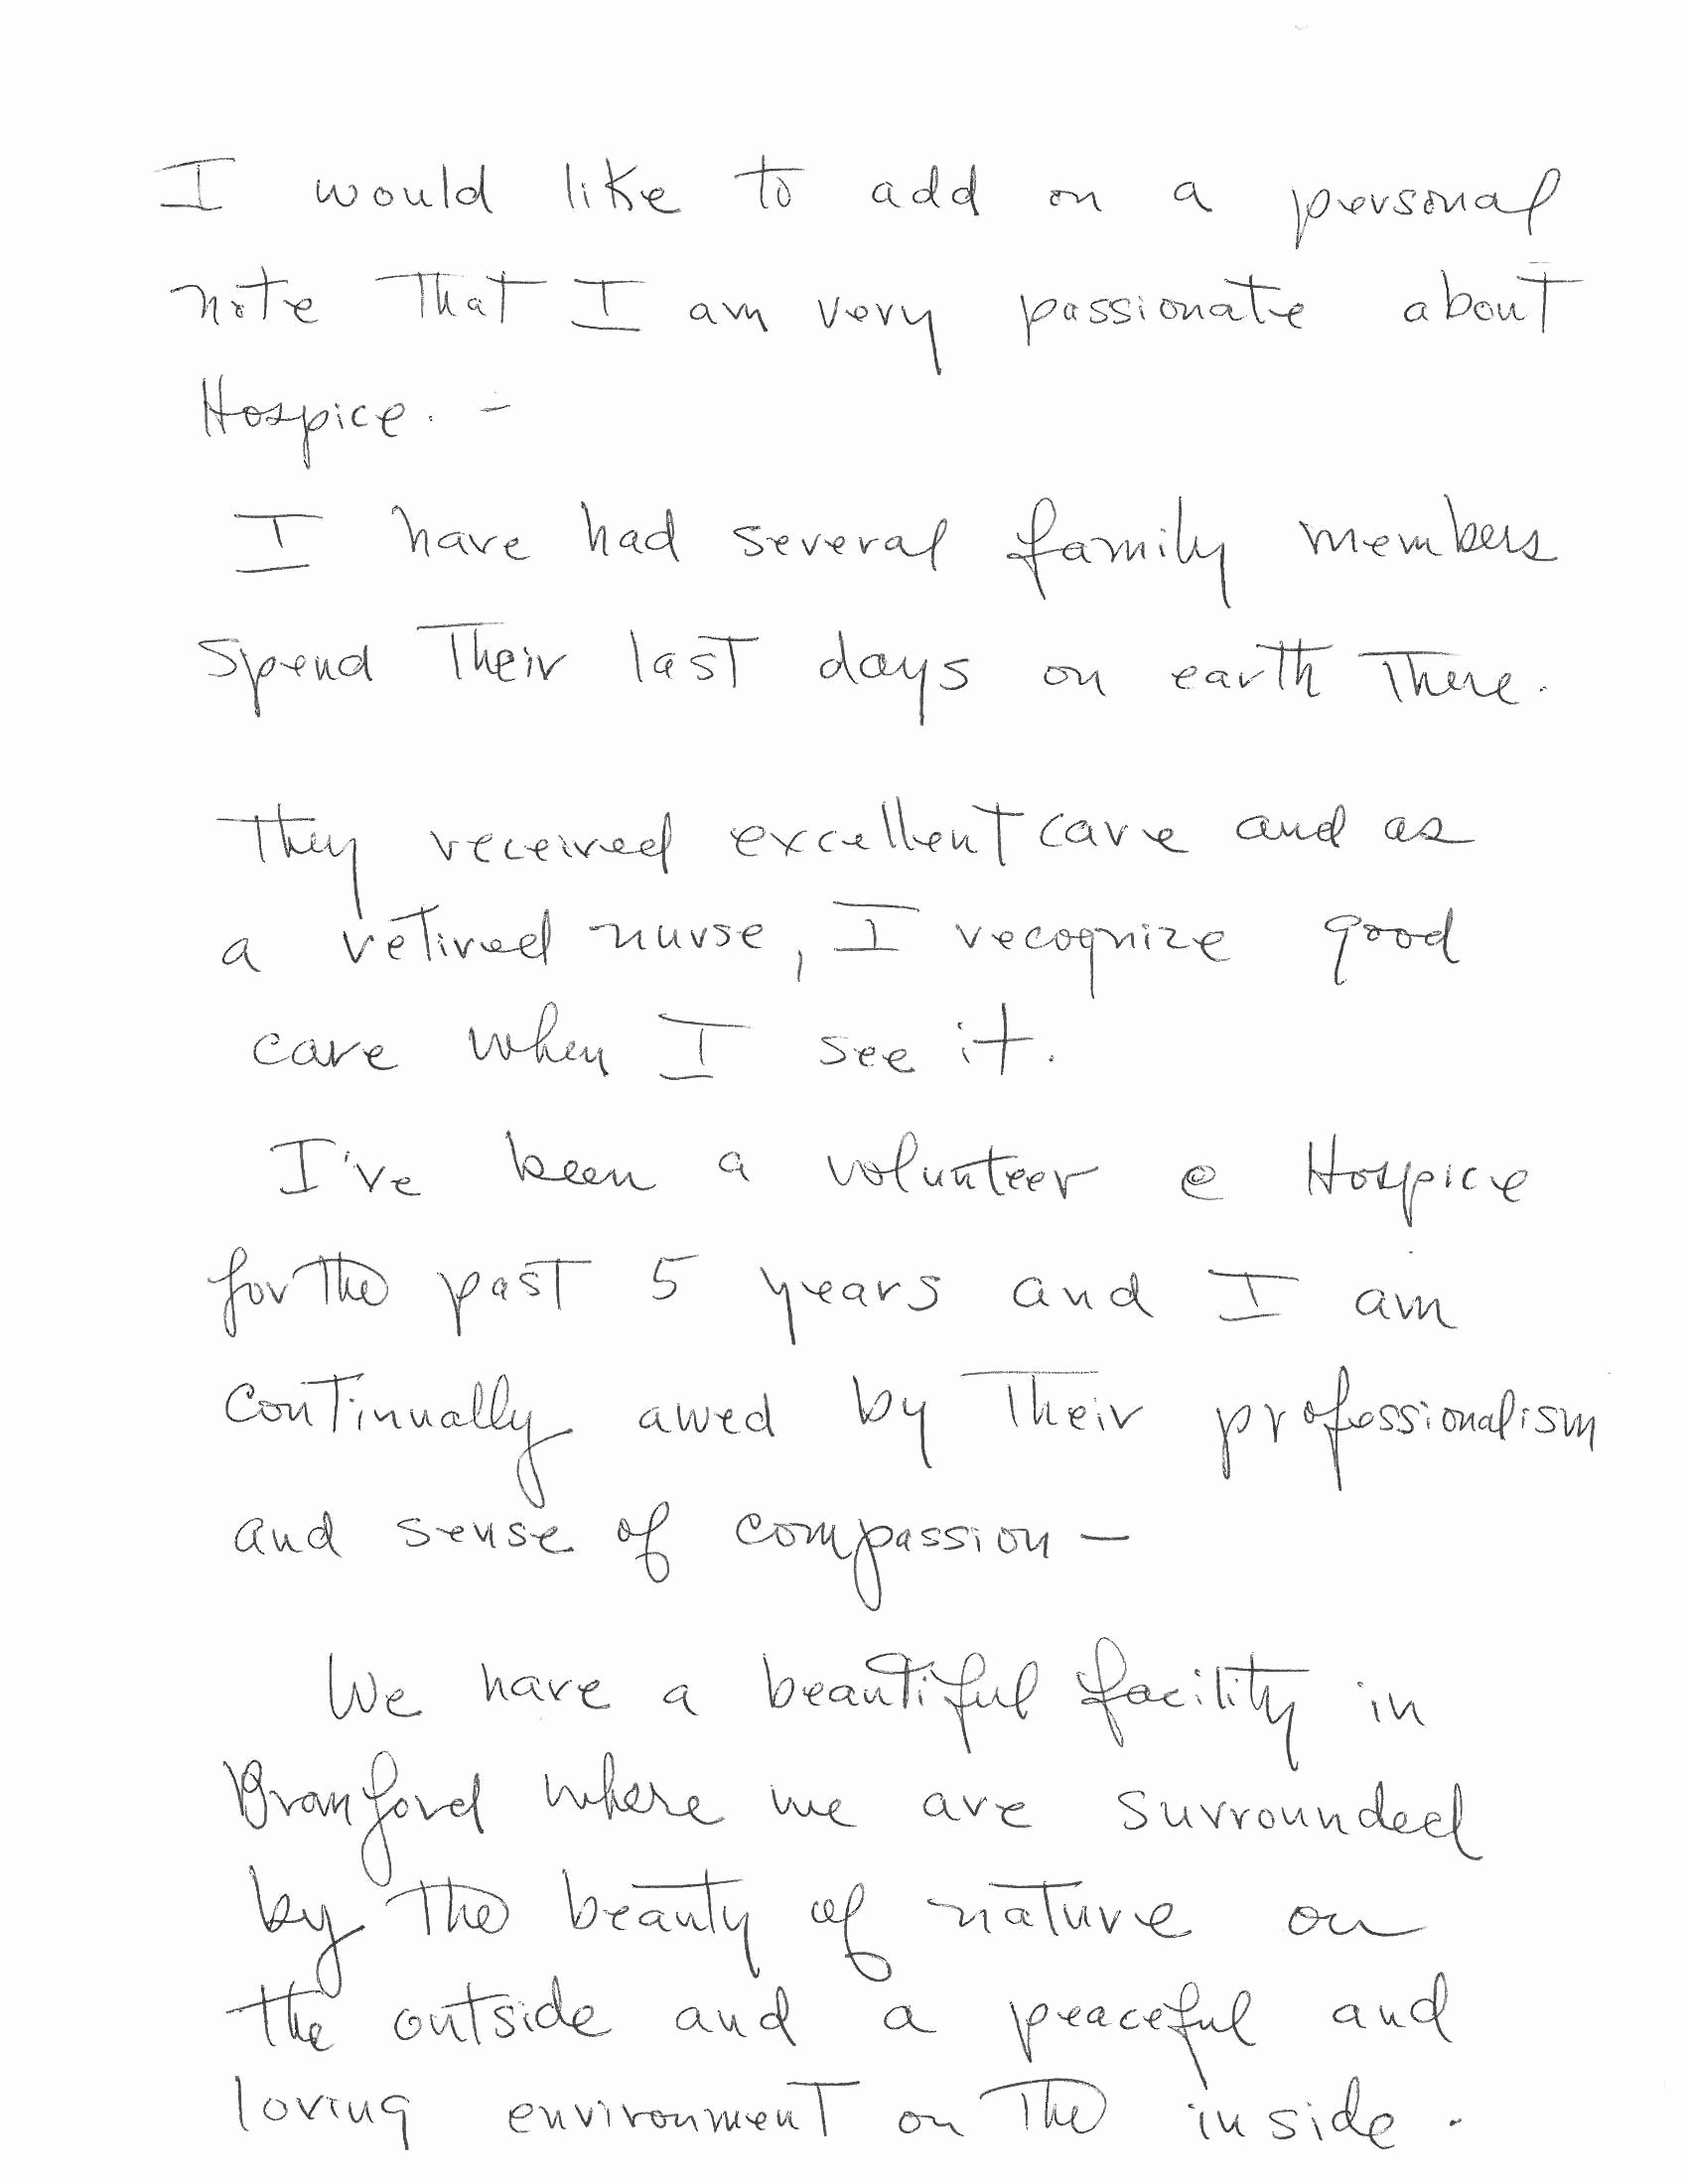 Thank You to Preceptor Lovely Volunteer Letter Terry Nuzzo Thank You the Connecticut Hospice Inc